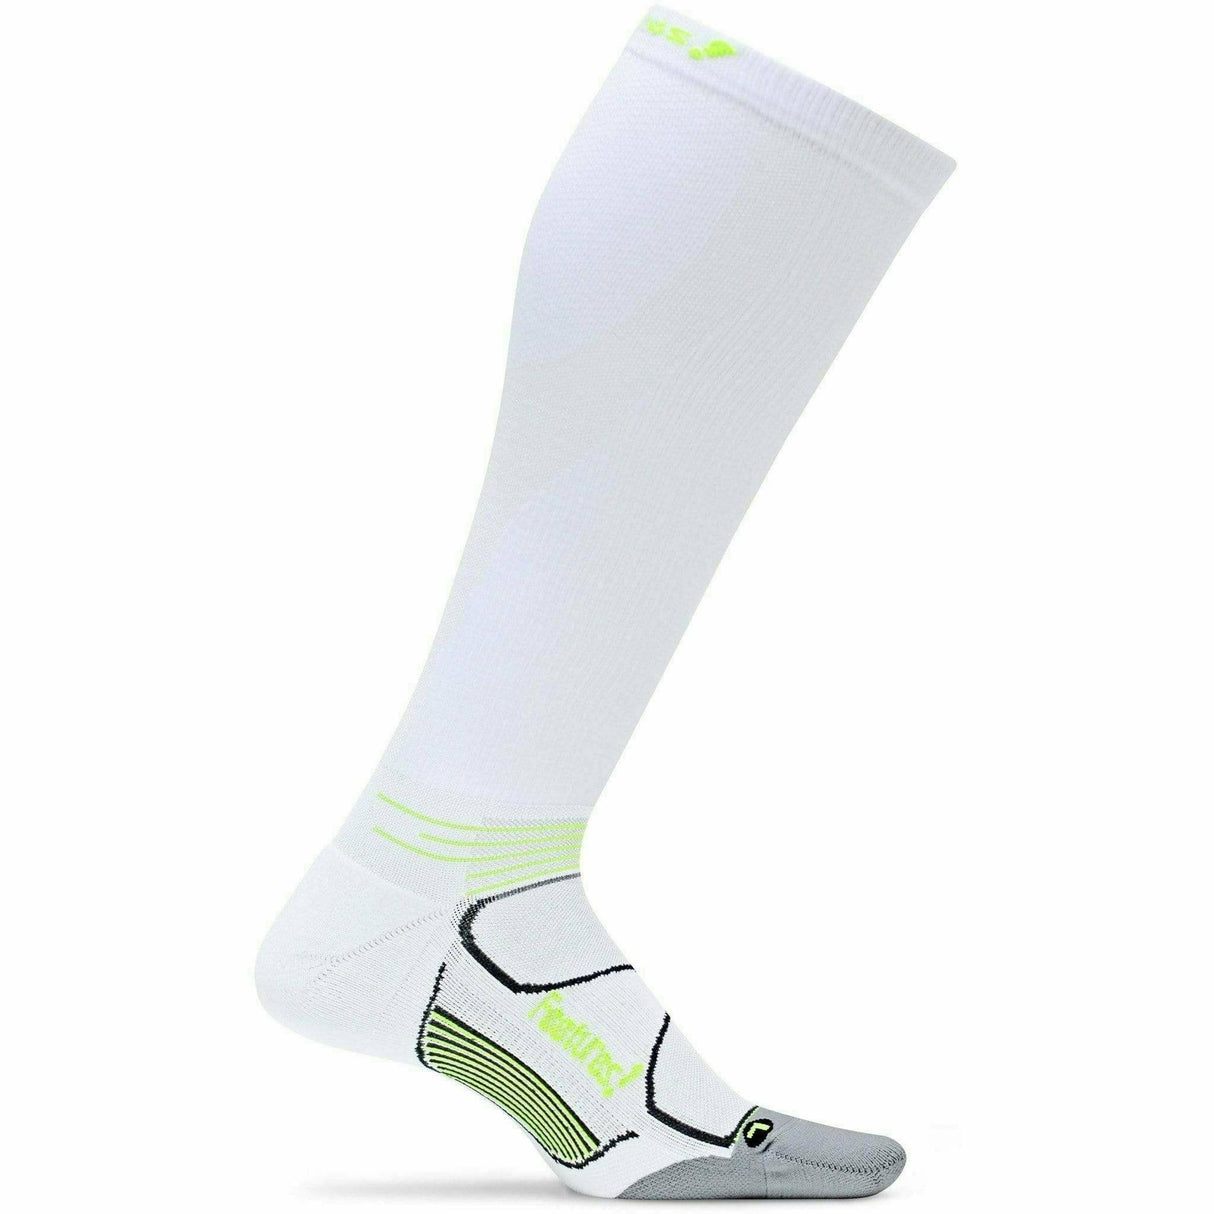 Feetures Graduated Compression Light Cushion Knee High Socks  -  Small / White/Reflector